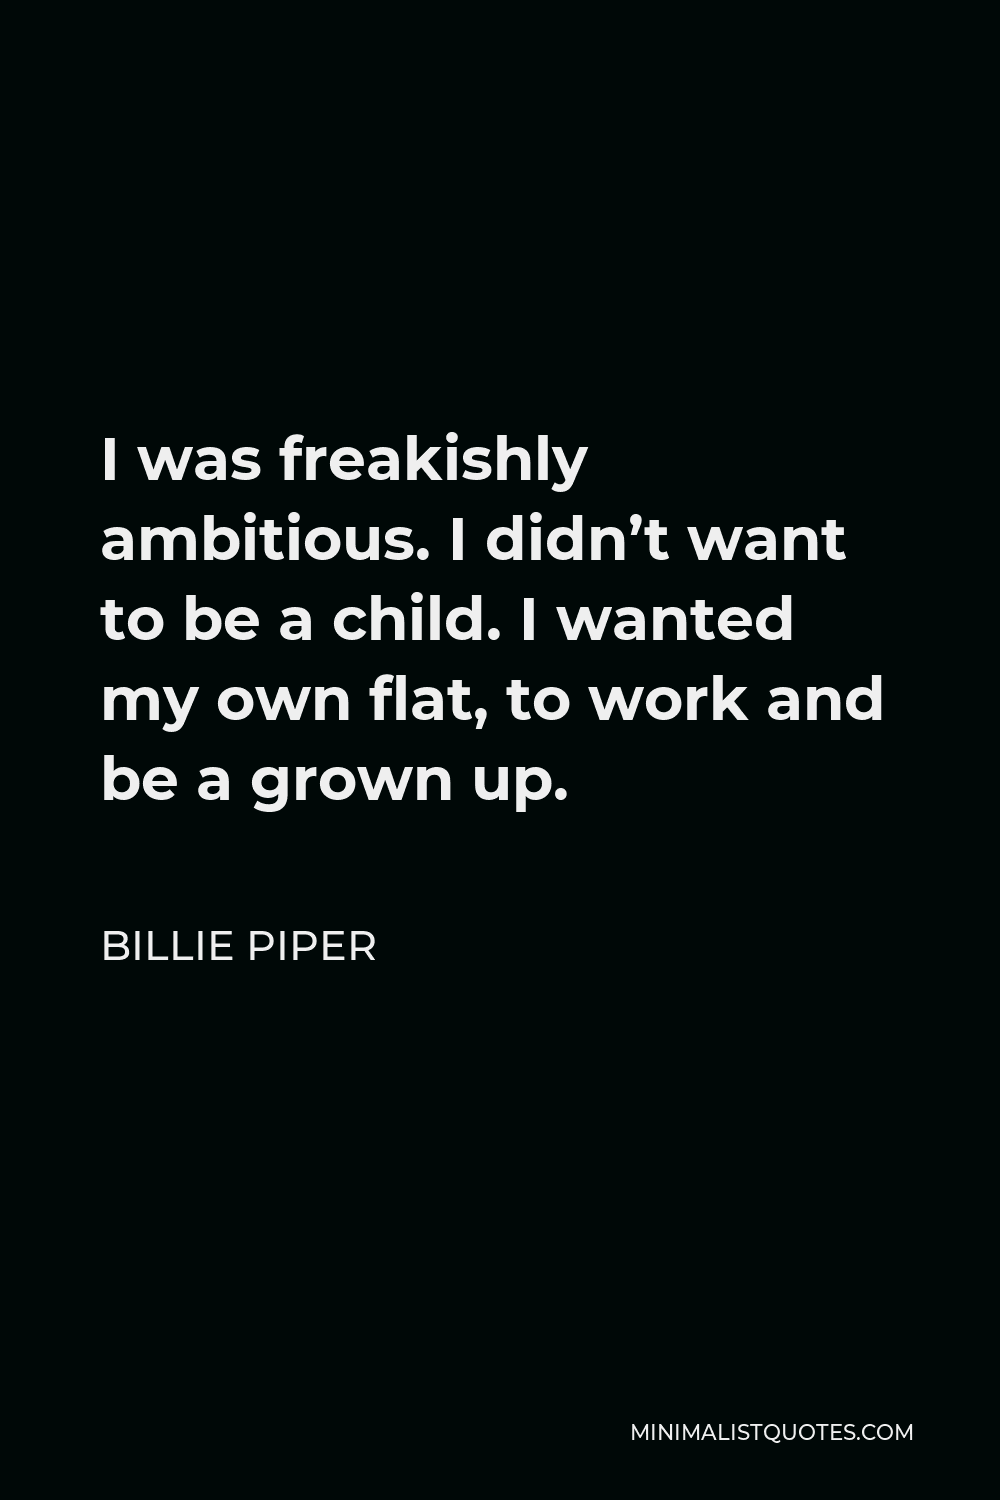 Billie Piper Quote - I was freakishly ambitious. I didn’t want to be a child. I wanted my own flat, to work and be a grown up.